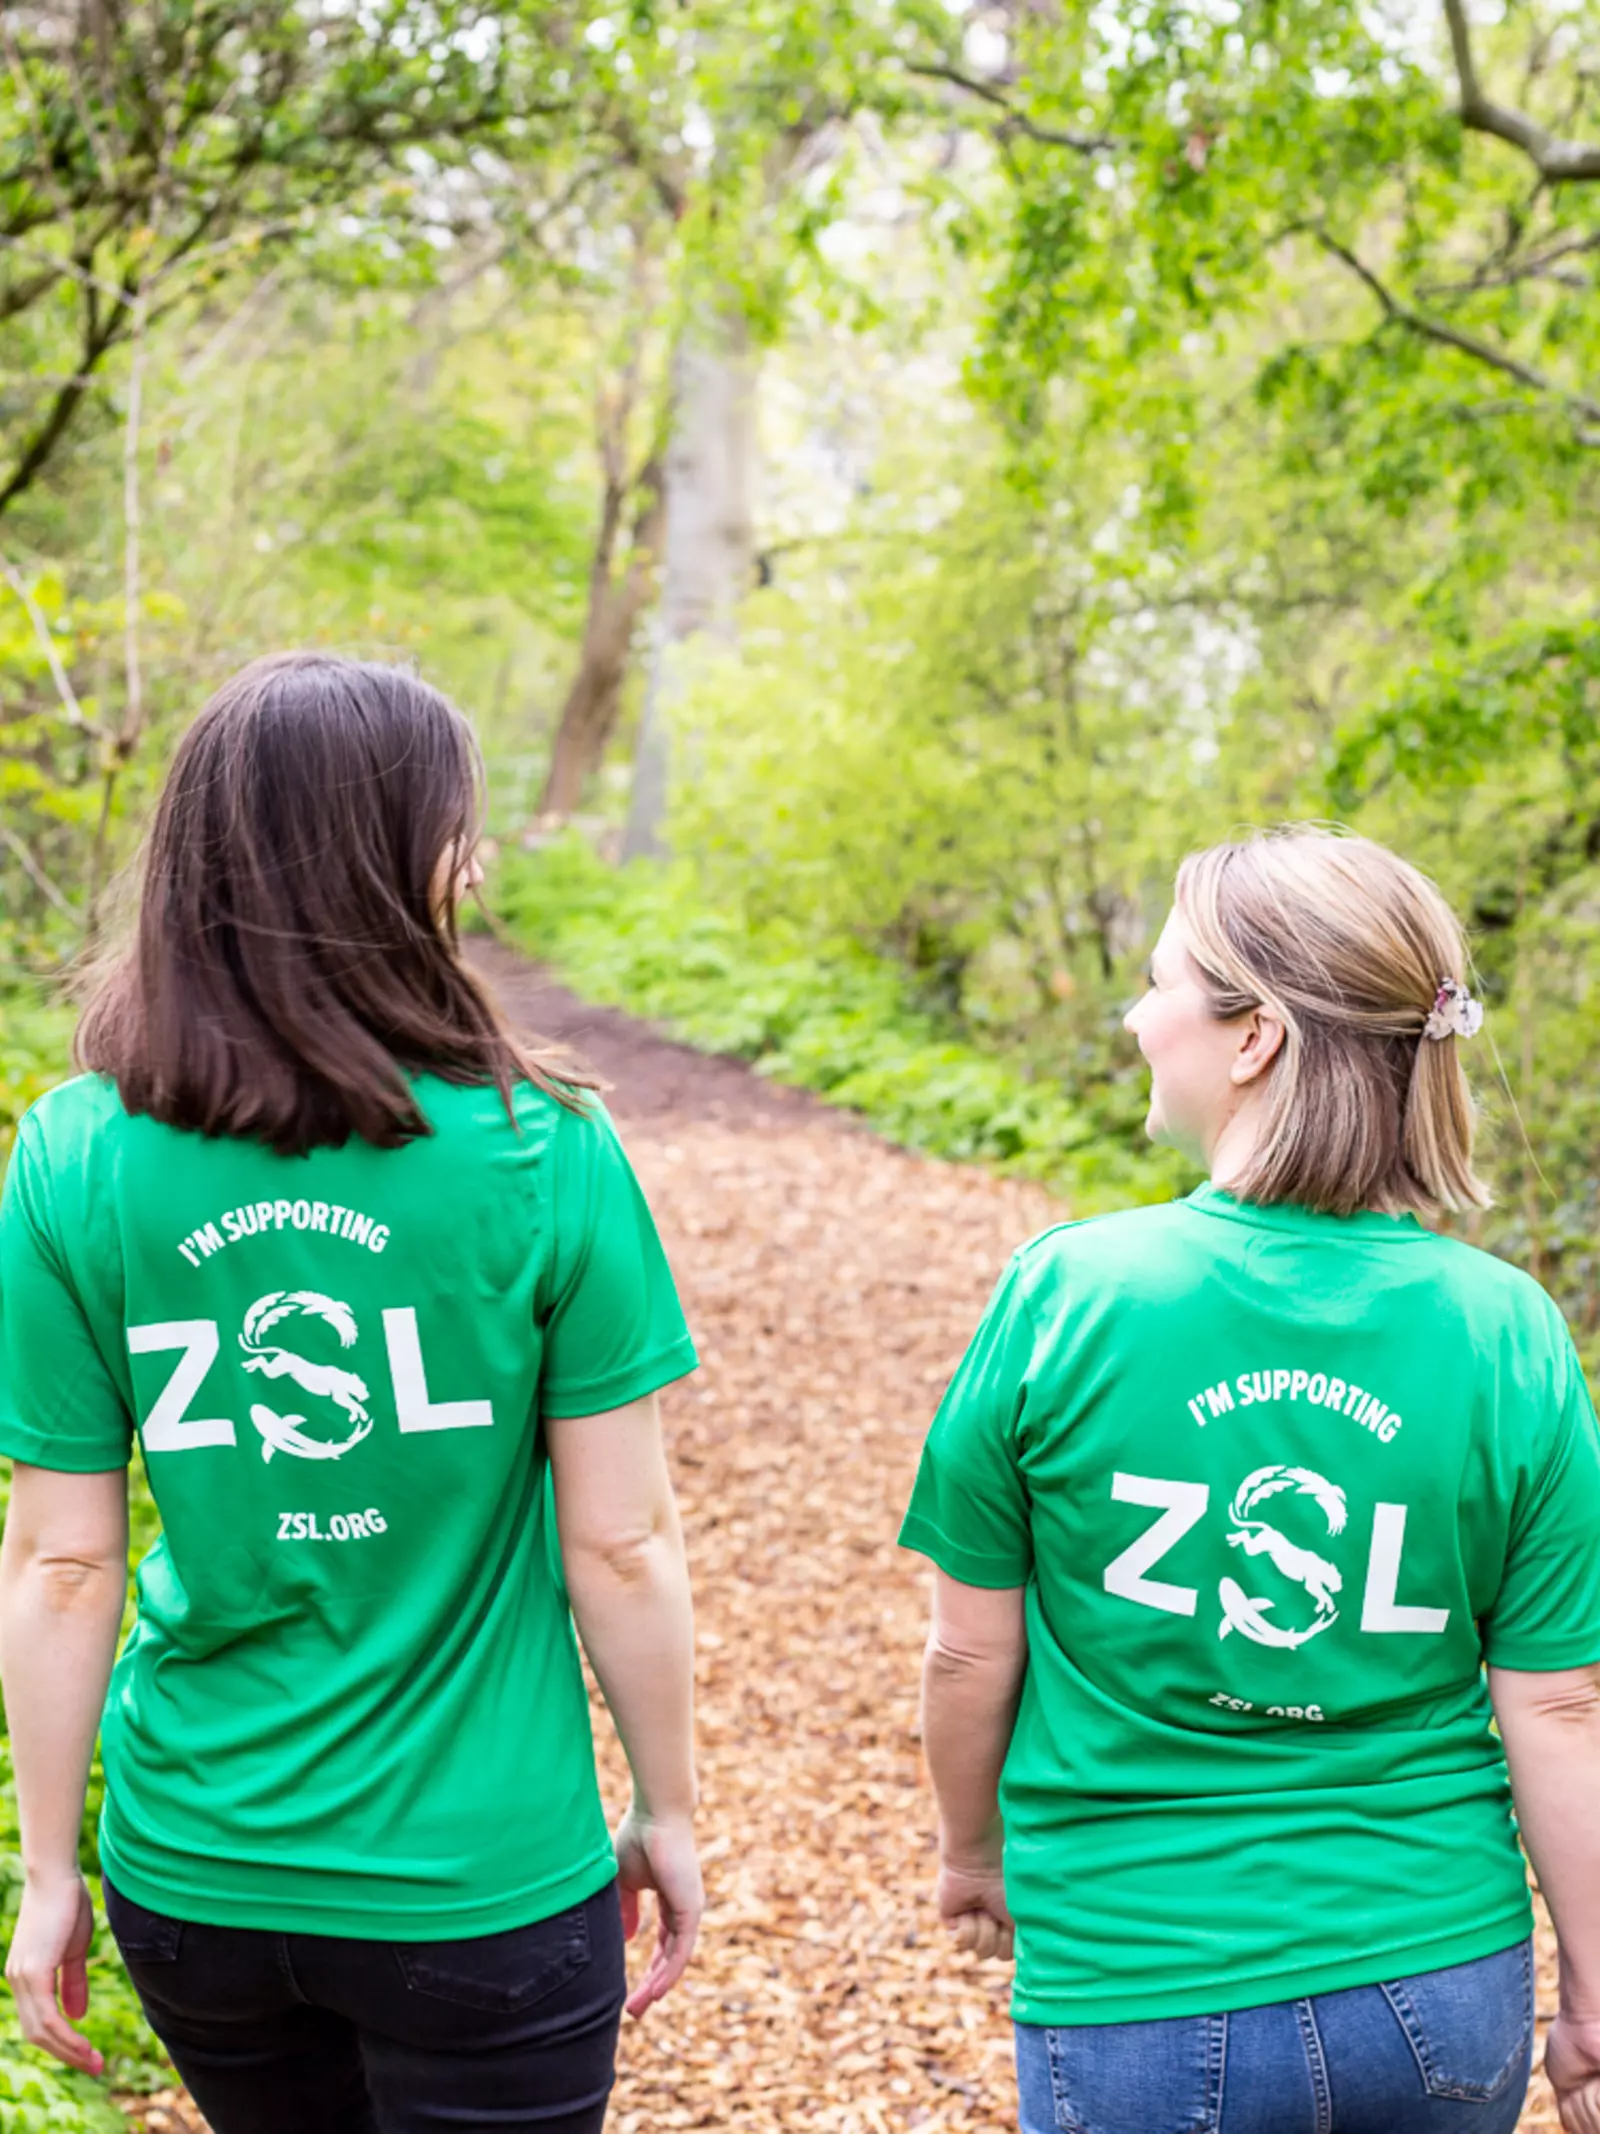 Around the World challenge participants in their ZSL t-shirts